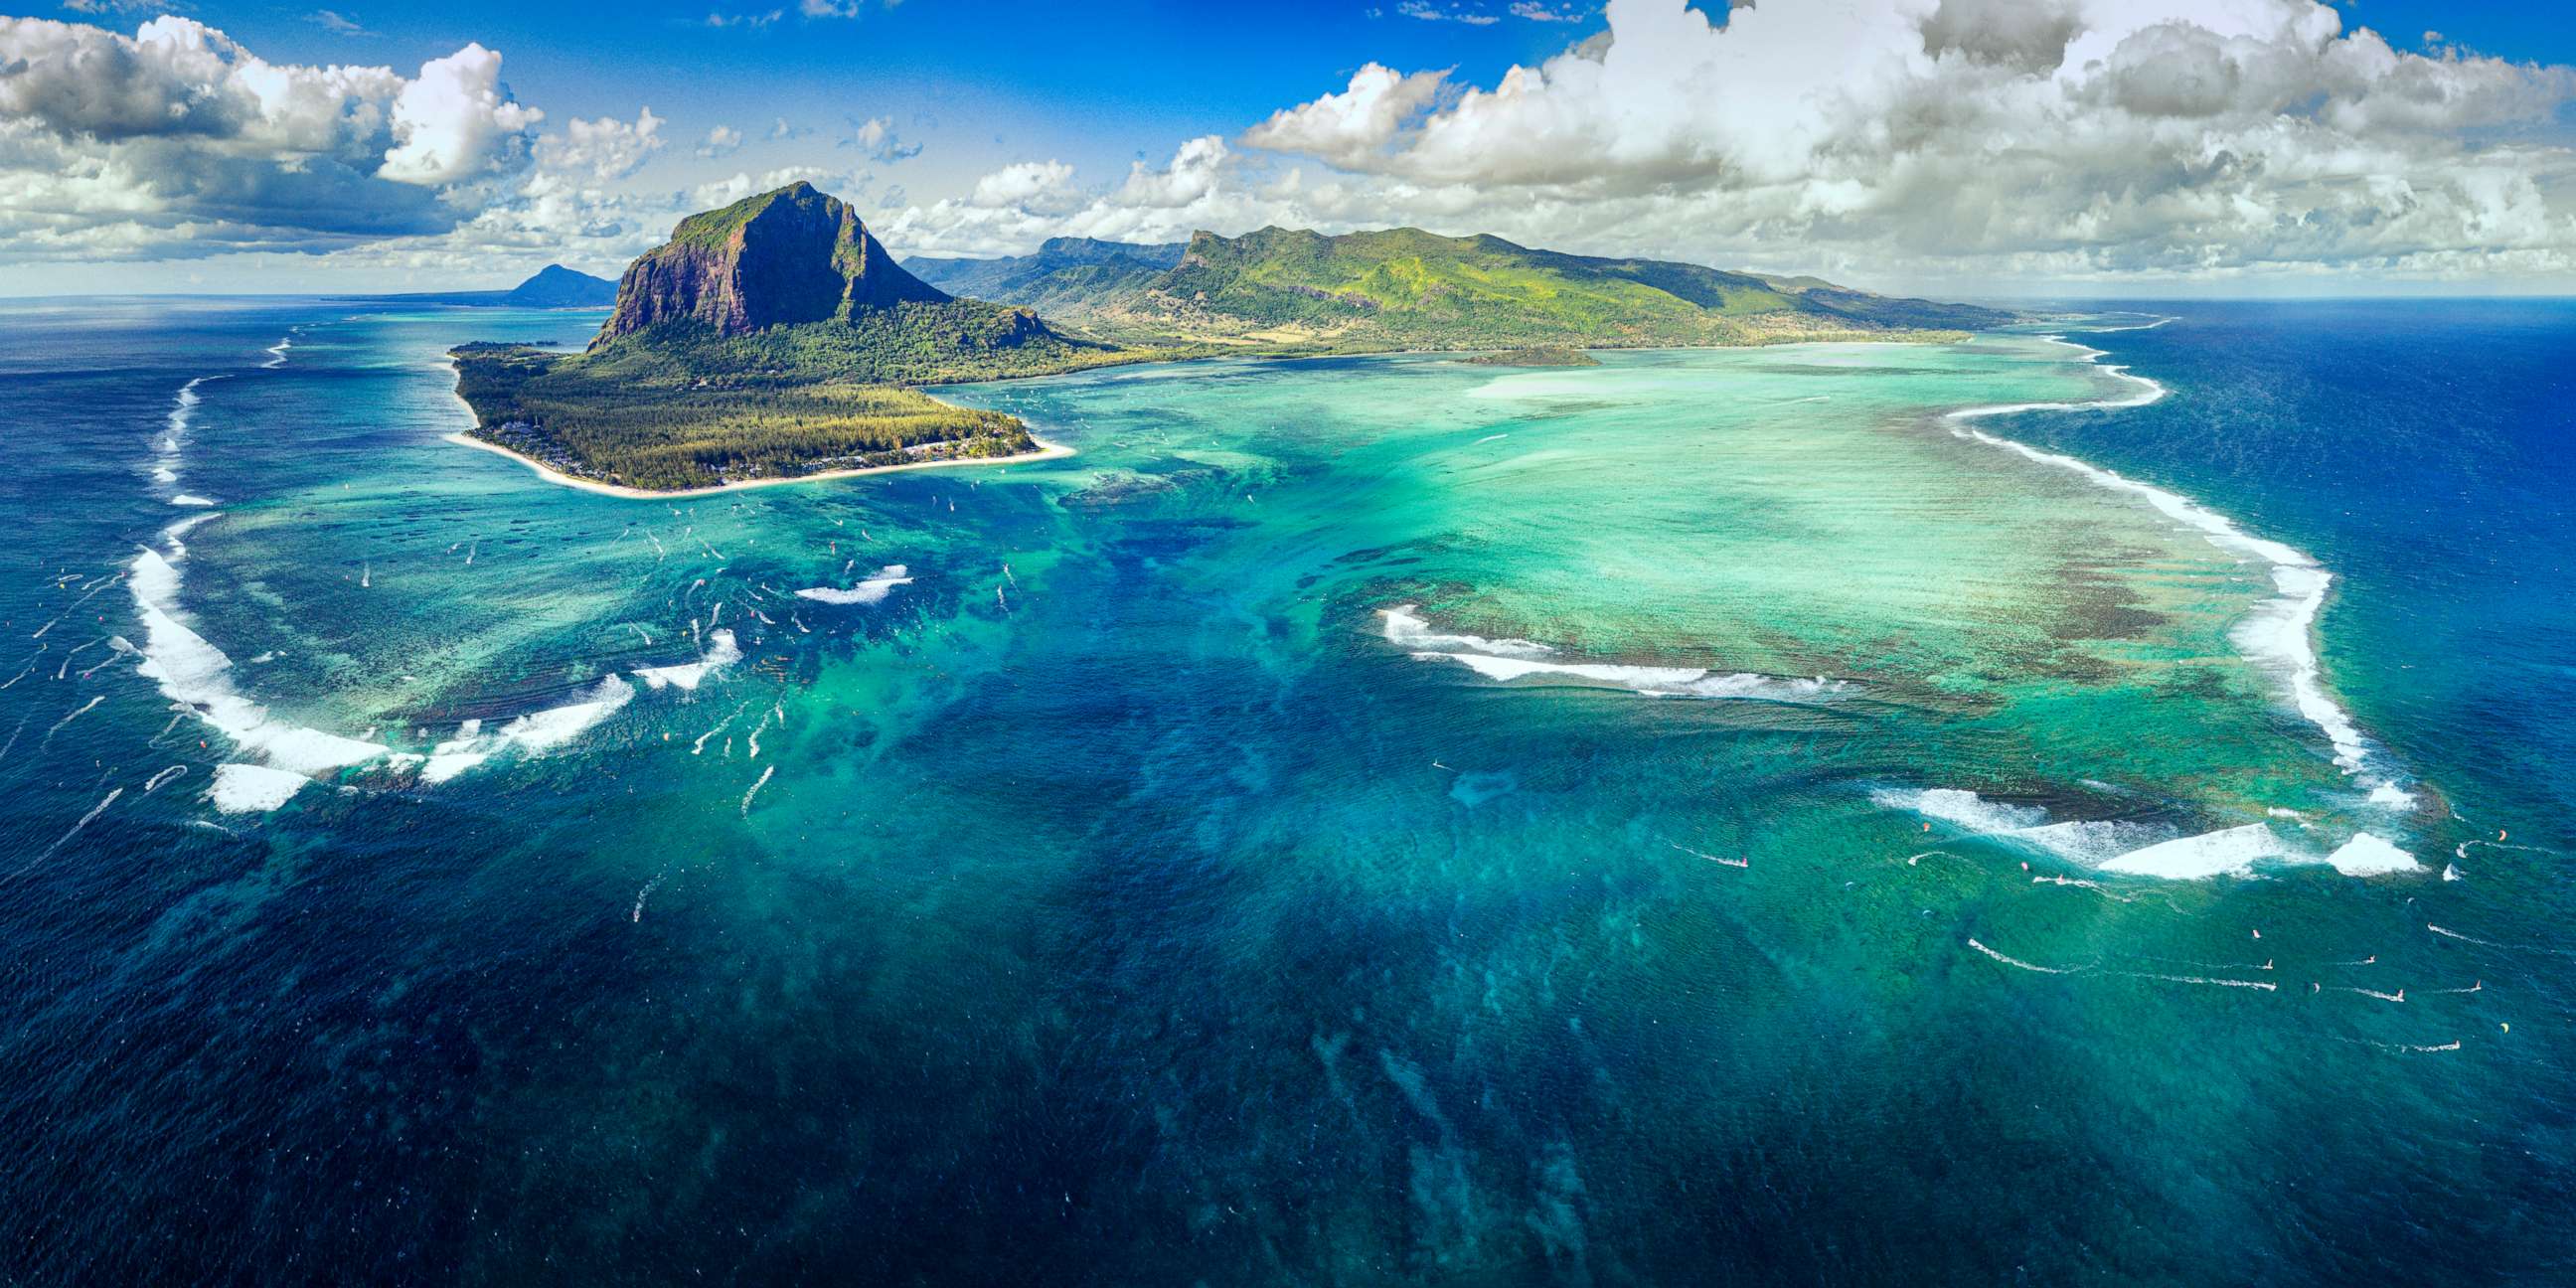 PHOTO: Aerial view of the Le Morne Brabant peninsula on the island of Mauritius in the Indian Ocean.